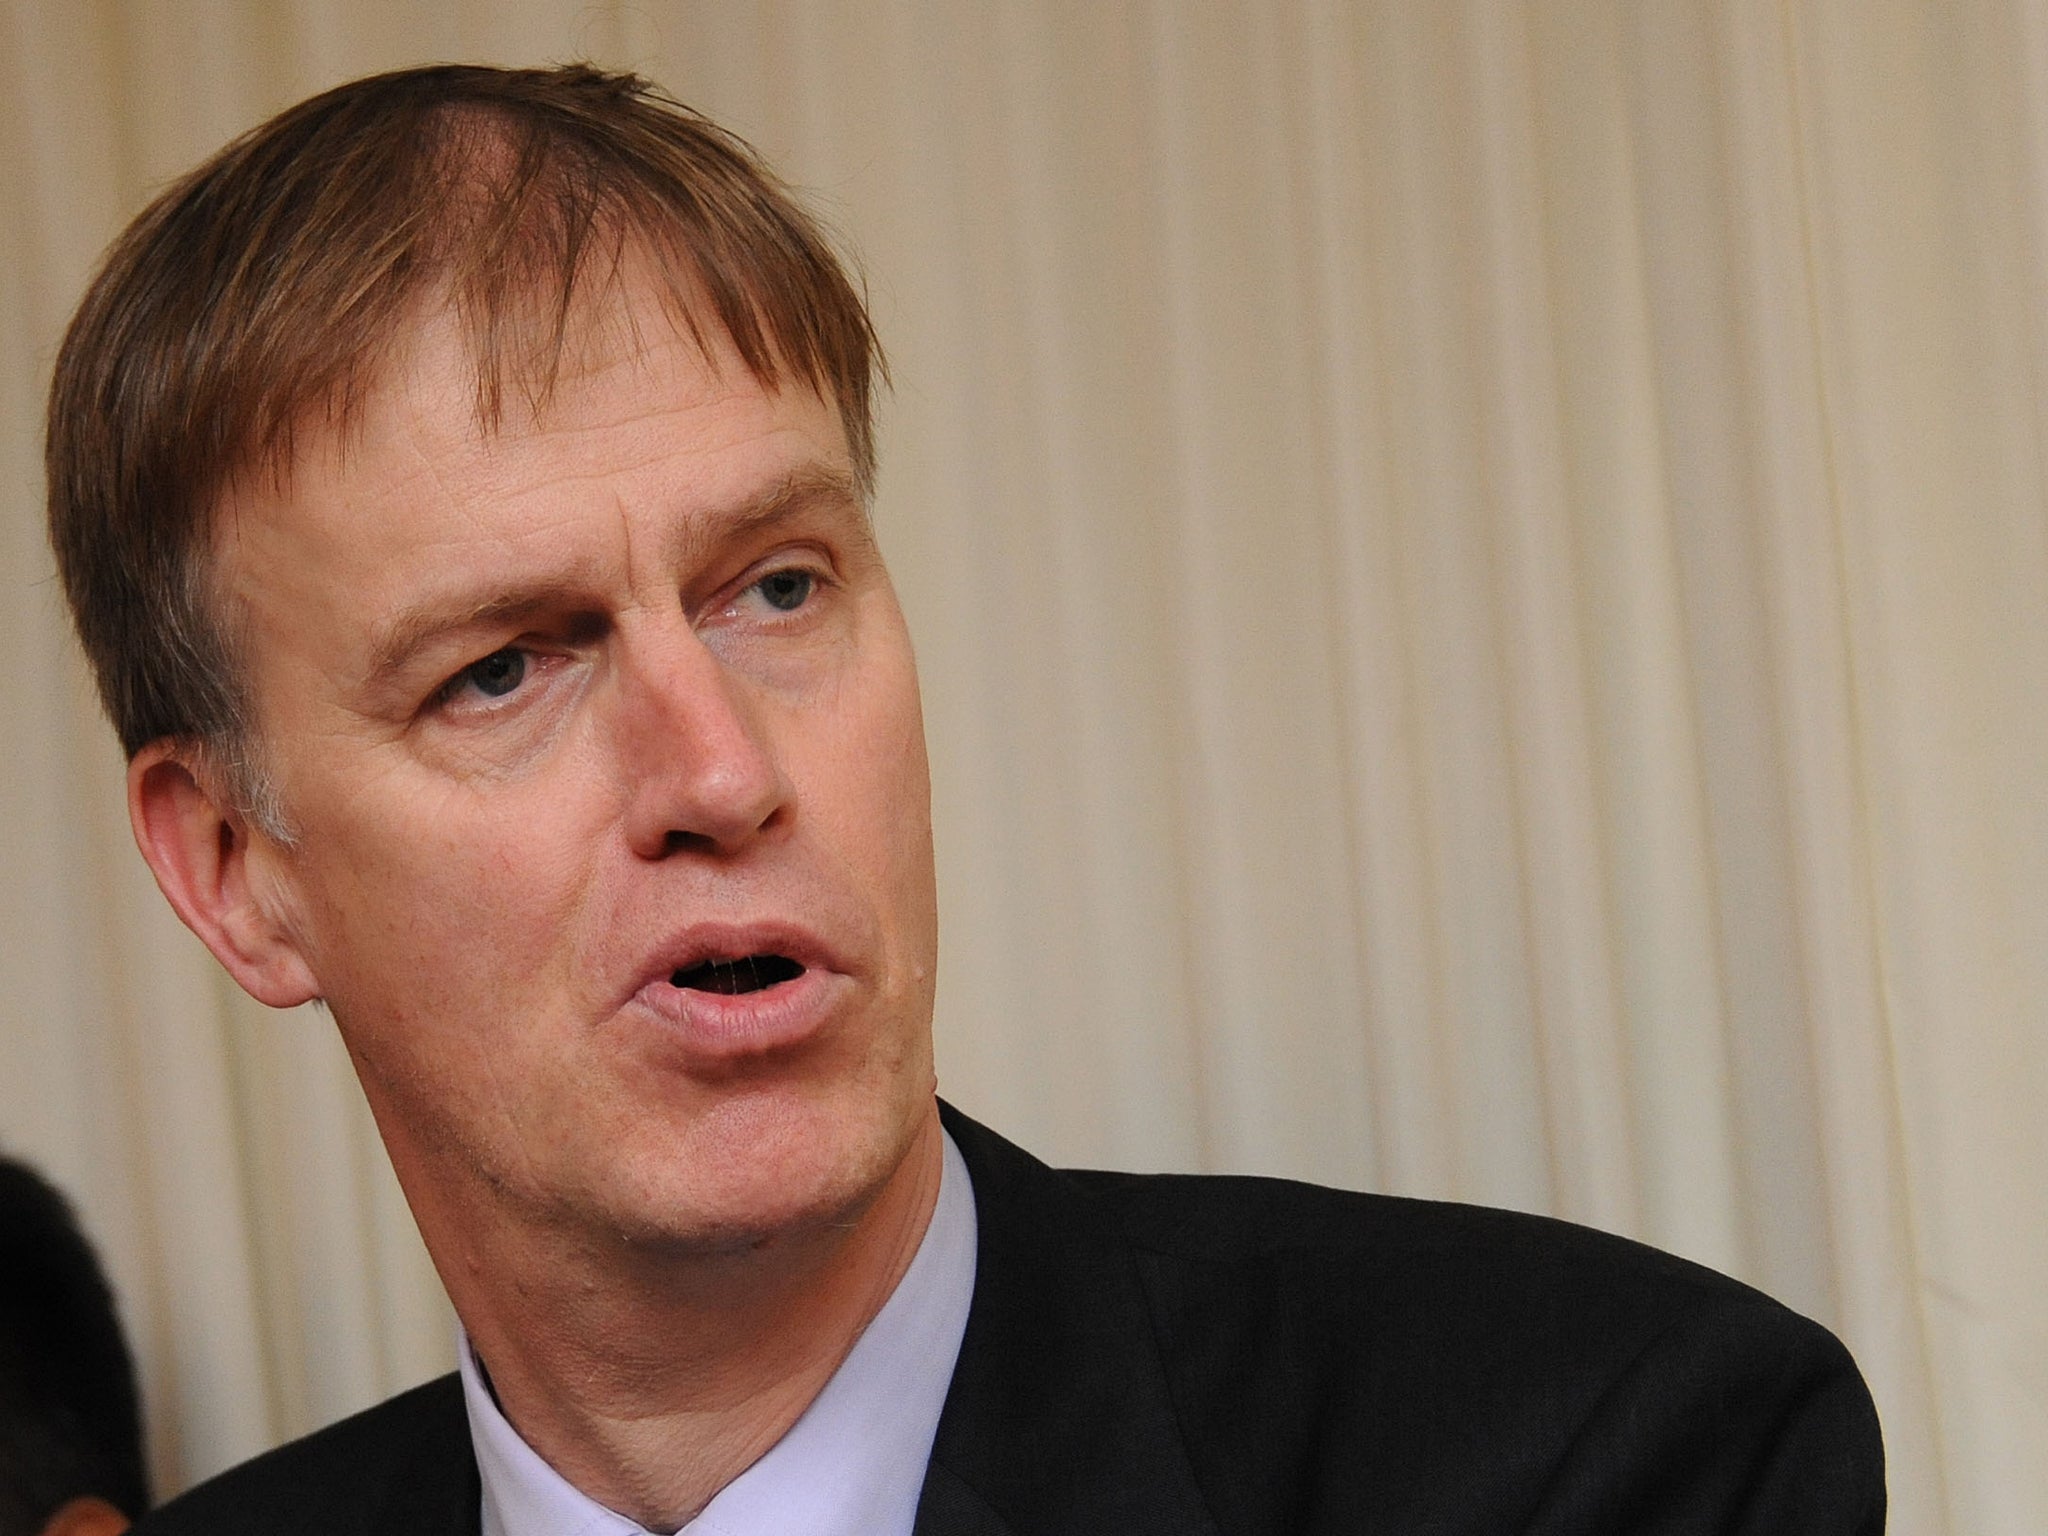 Stephen Timms voted against allowing same-sex couples to marry in 2013